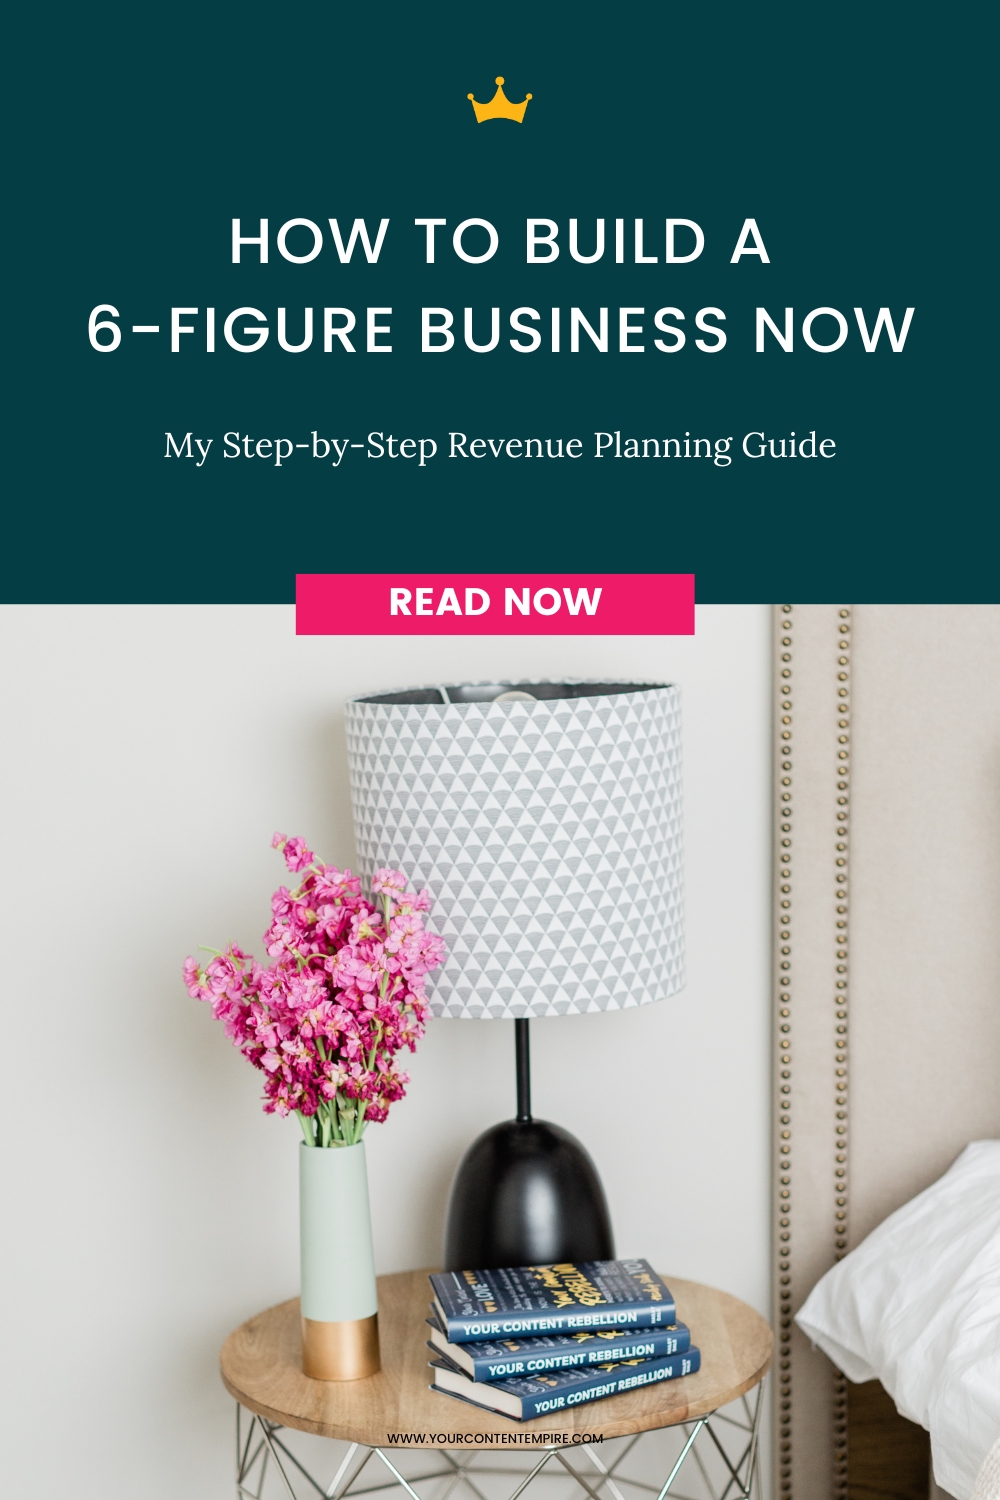 How to Build a 6-Figure Business (My Step-by-Step Revenue Planning Guide)